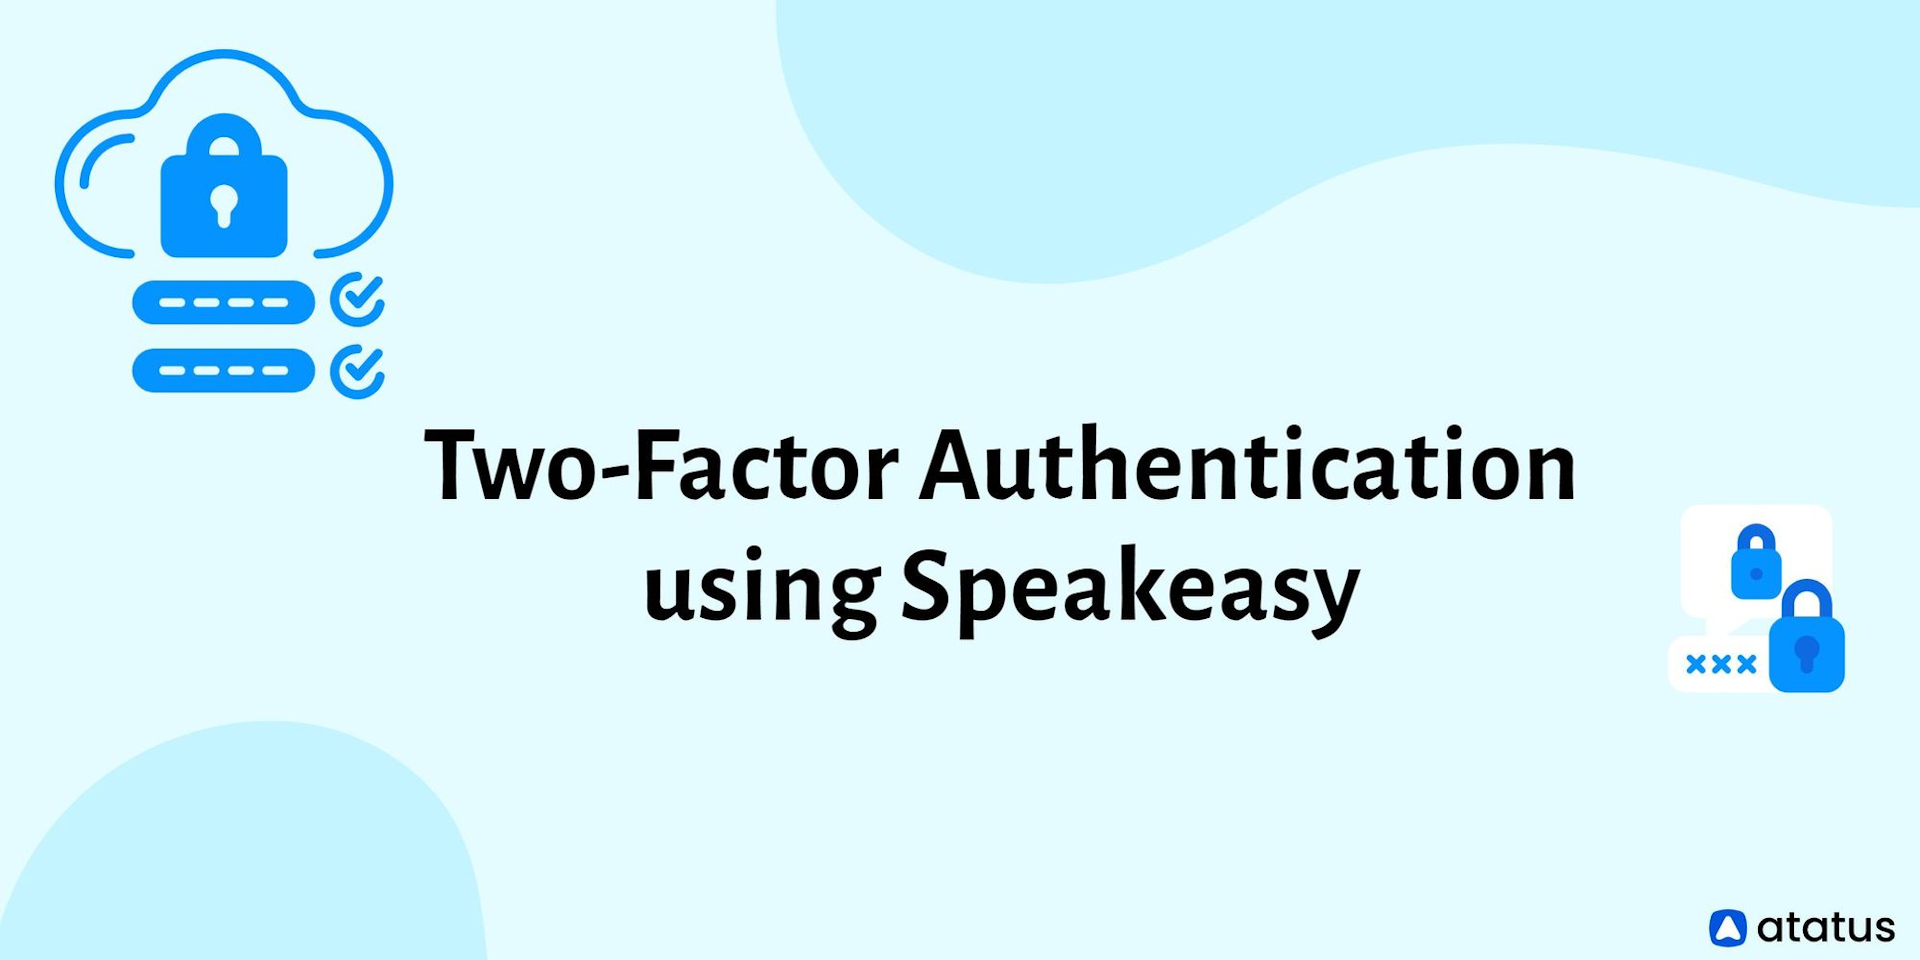 How to implement two-factor authentication with Speakeasy in Node.js